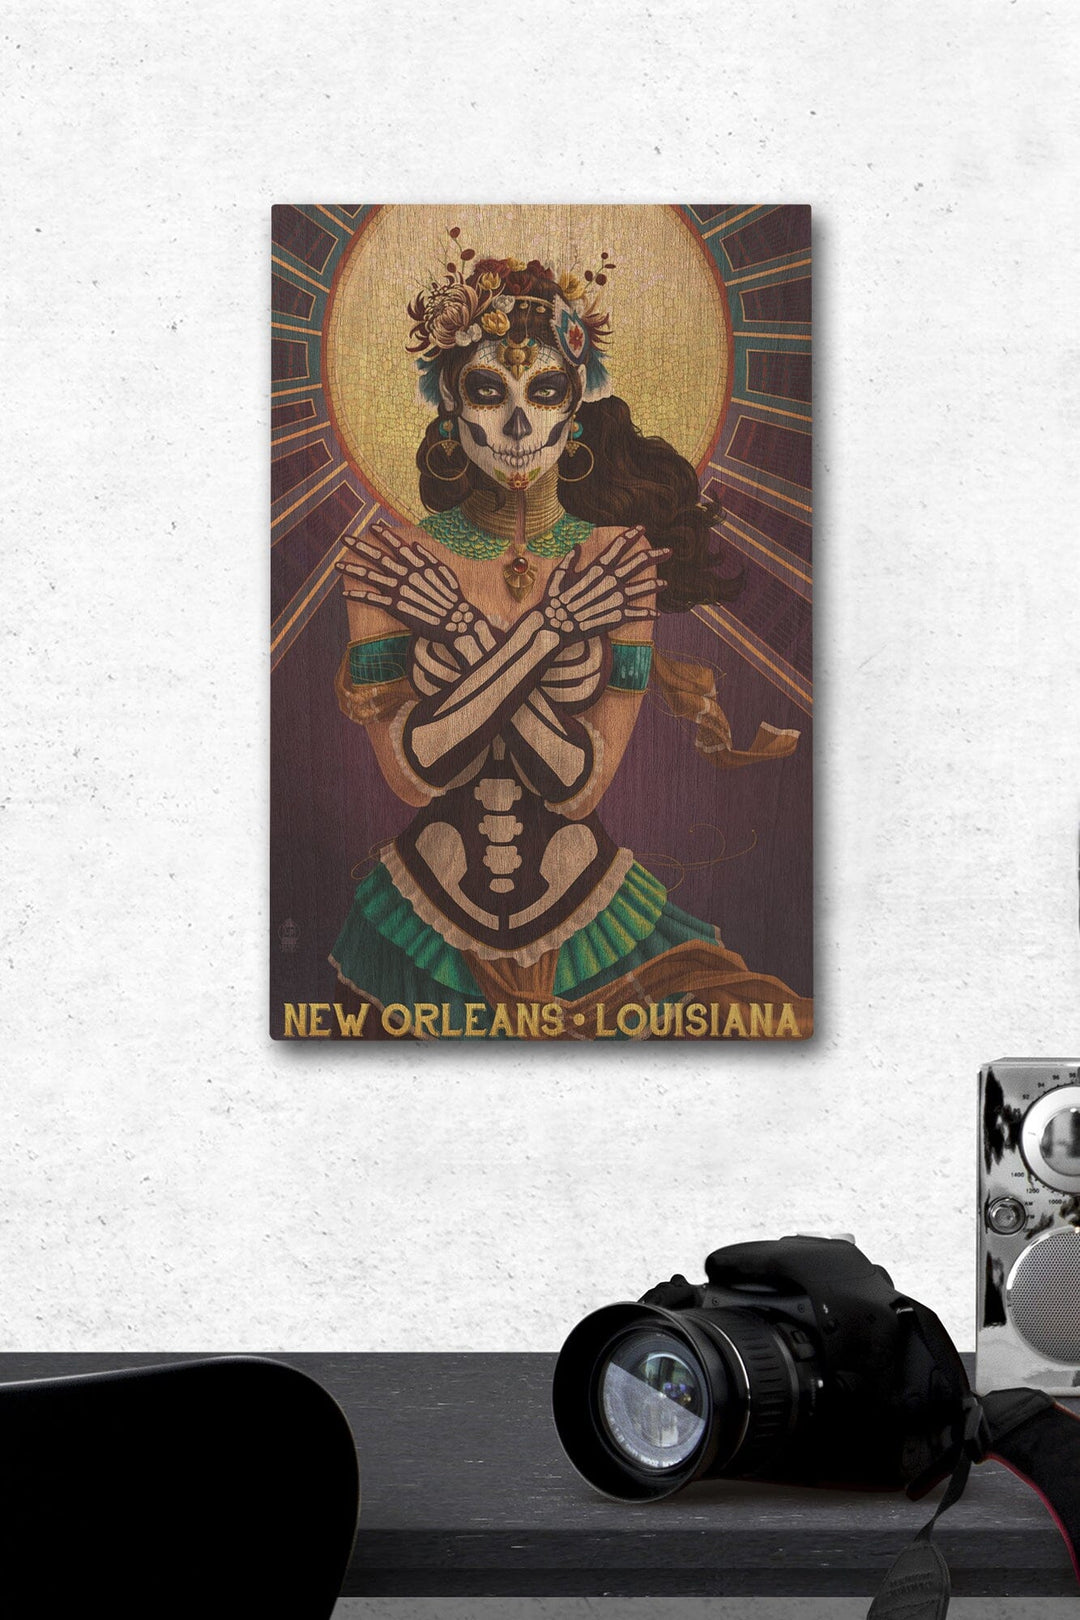 New Orleans, Louisiana, Day of the Dead, Crossbones, Lantern Press Artwork, Wood Signs and Postcards Wood Lantern Press 12 x 18 Wood Gallery Print 